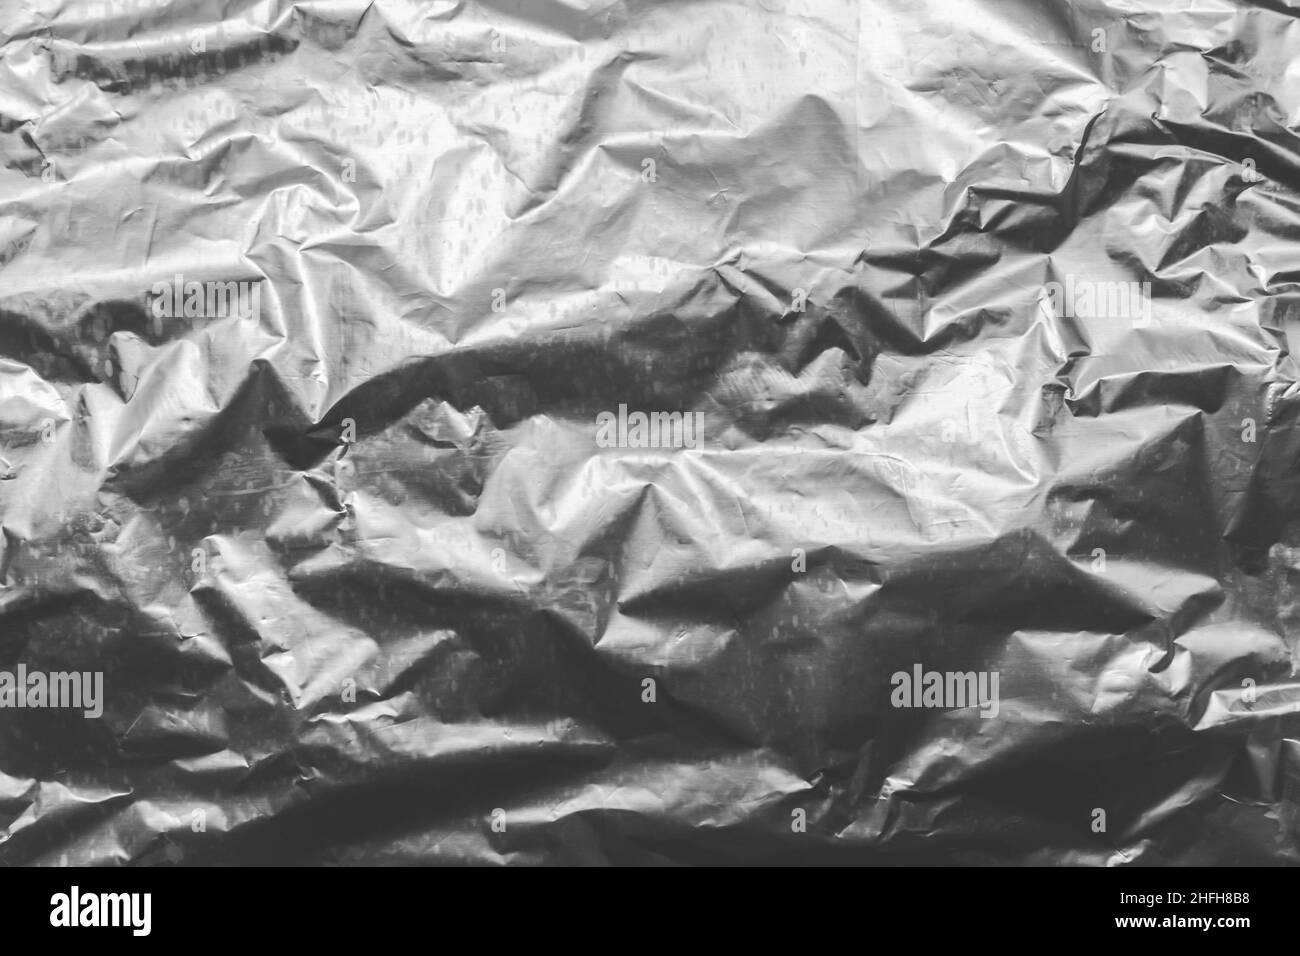 Foil crumpled texture wrinkled silver material abstract pattern surface background. Stock Photo